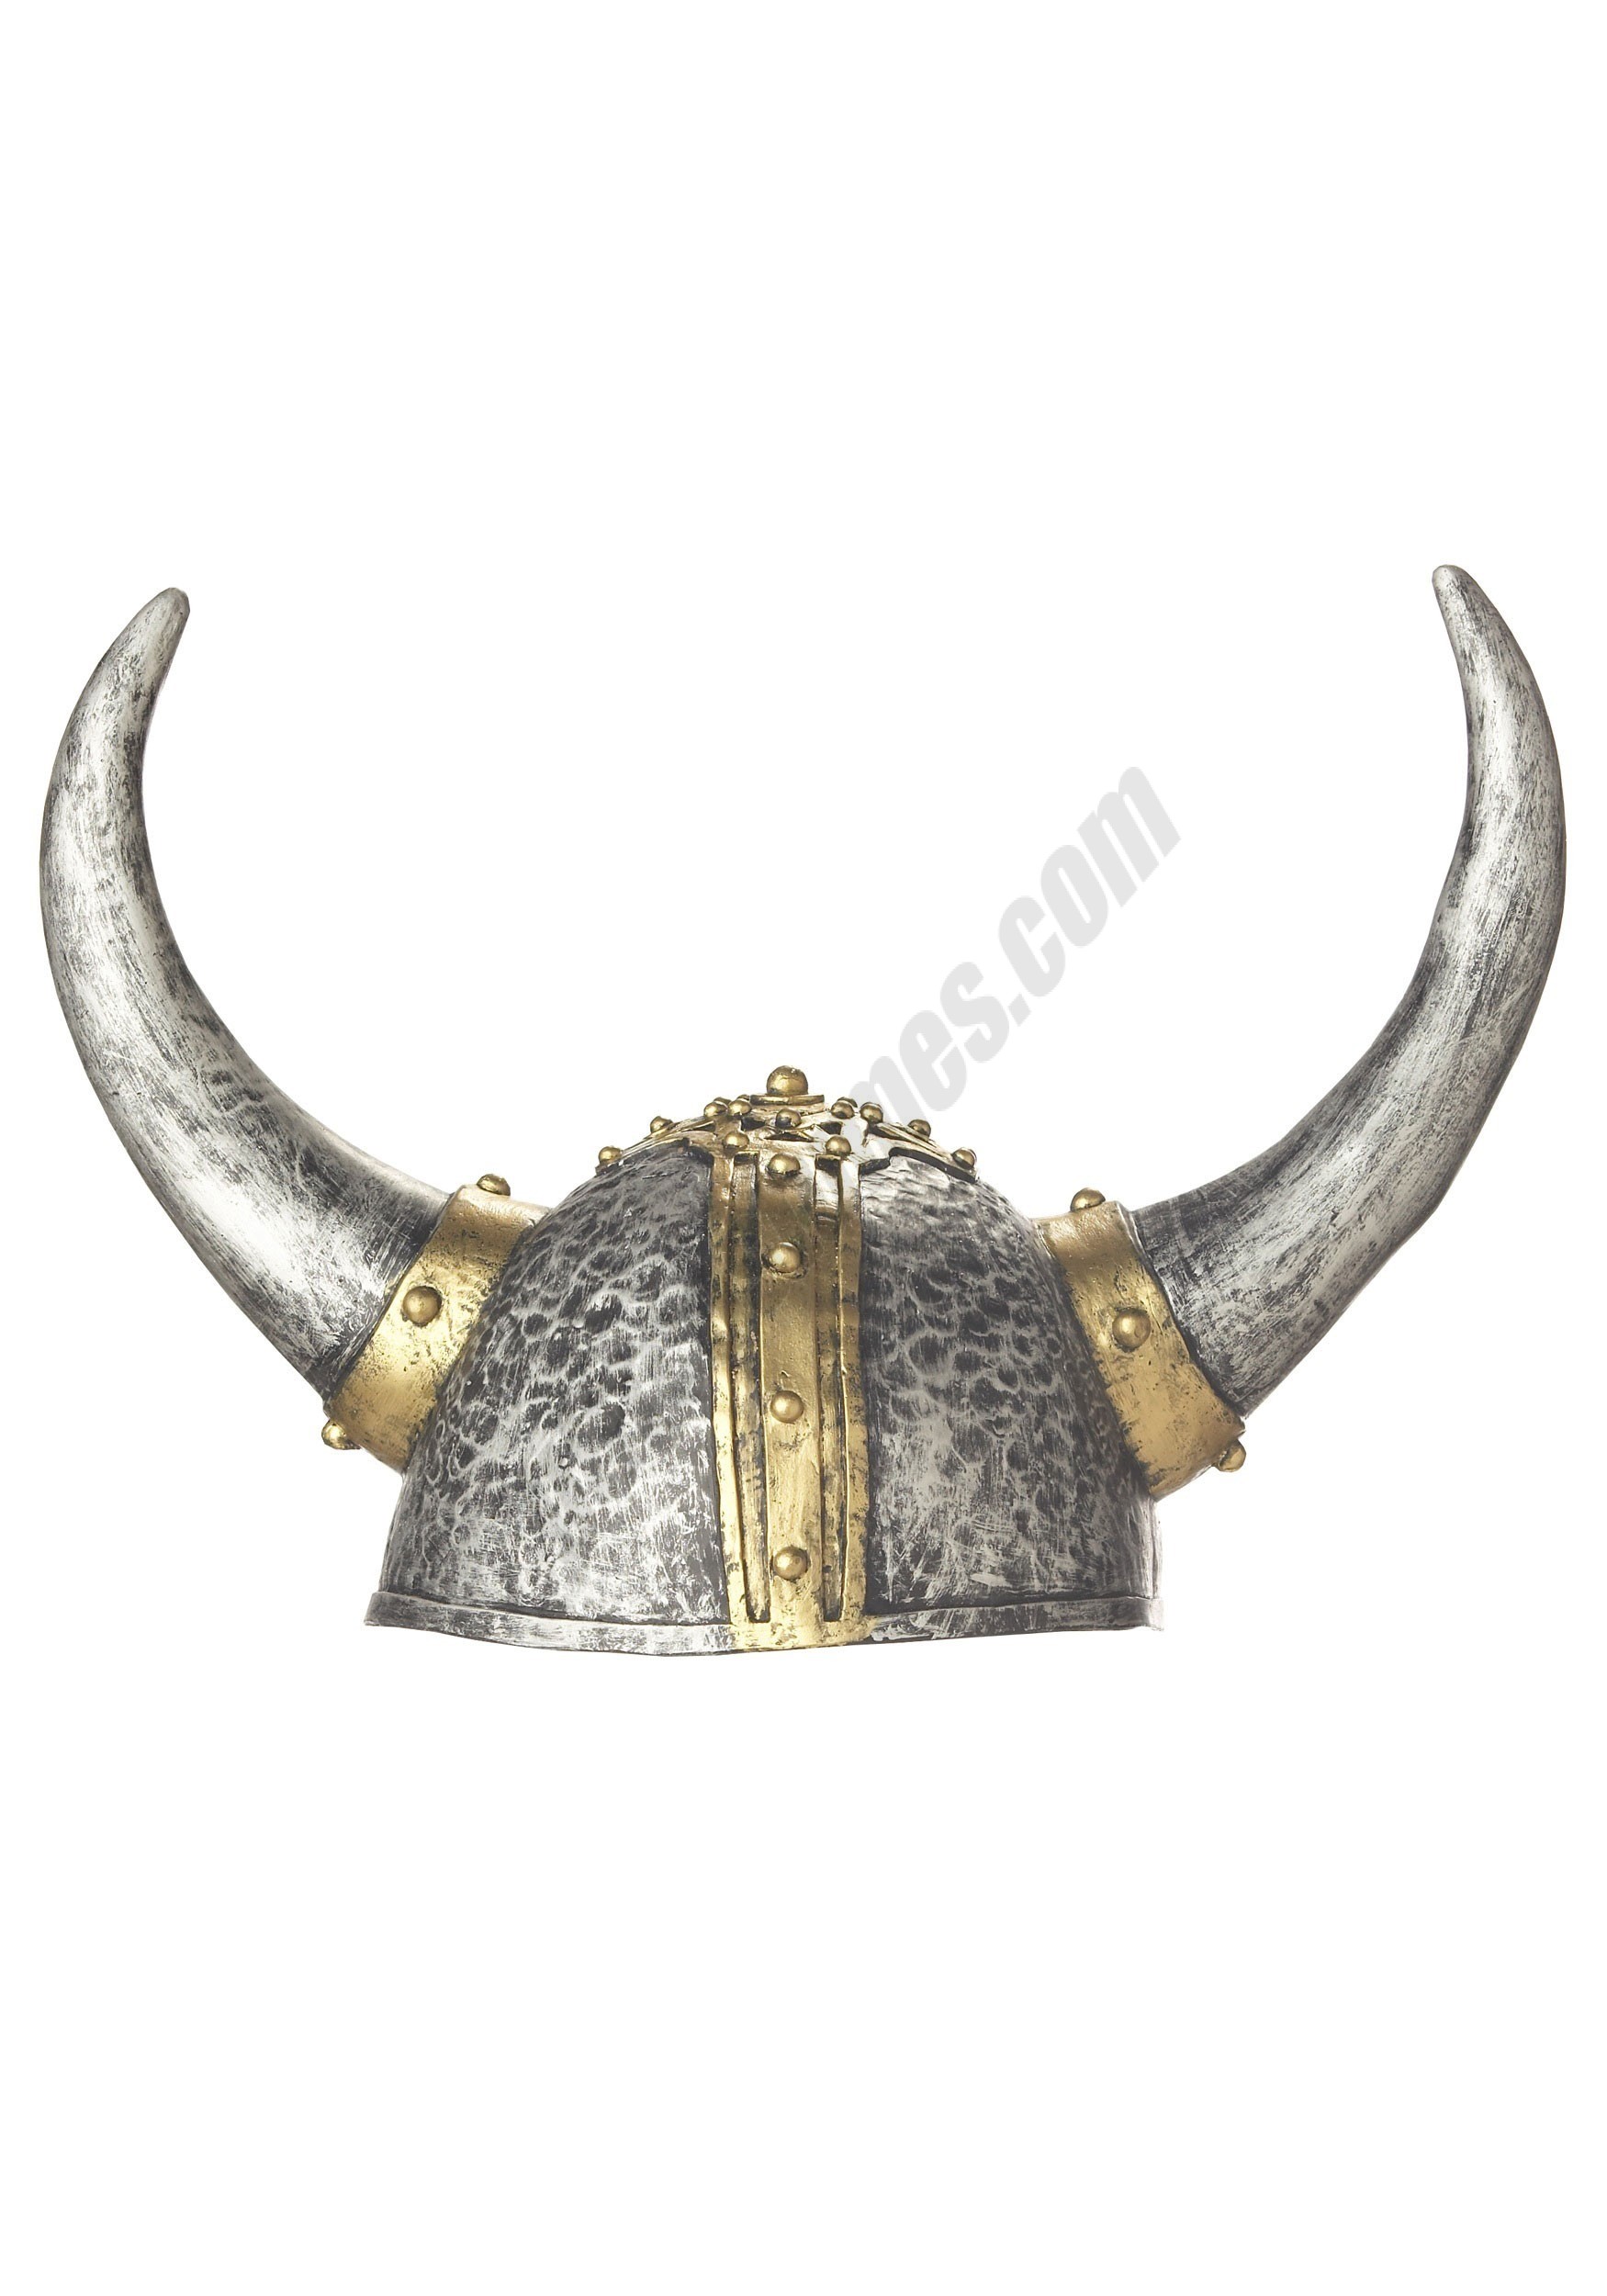 Silver and Gold Colored Viking Helmet Promotions - Silver and Gold Colored Viking Helmet Promotions